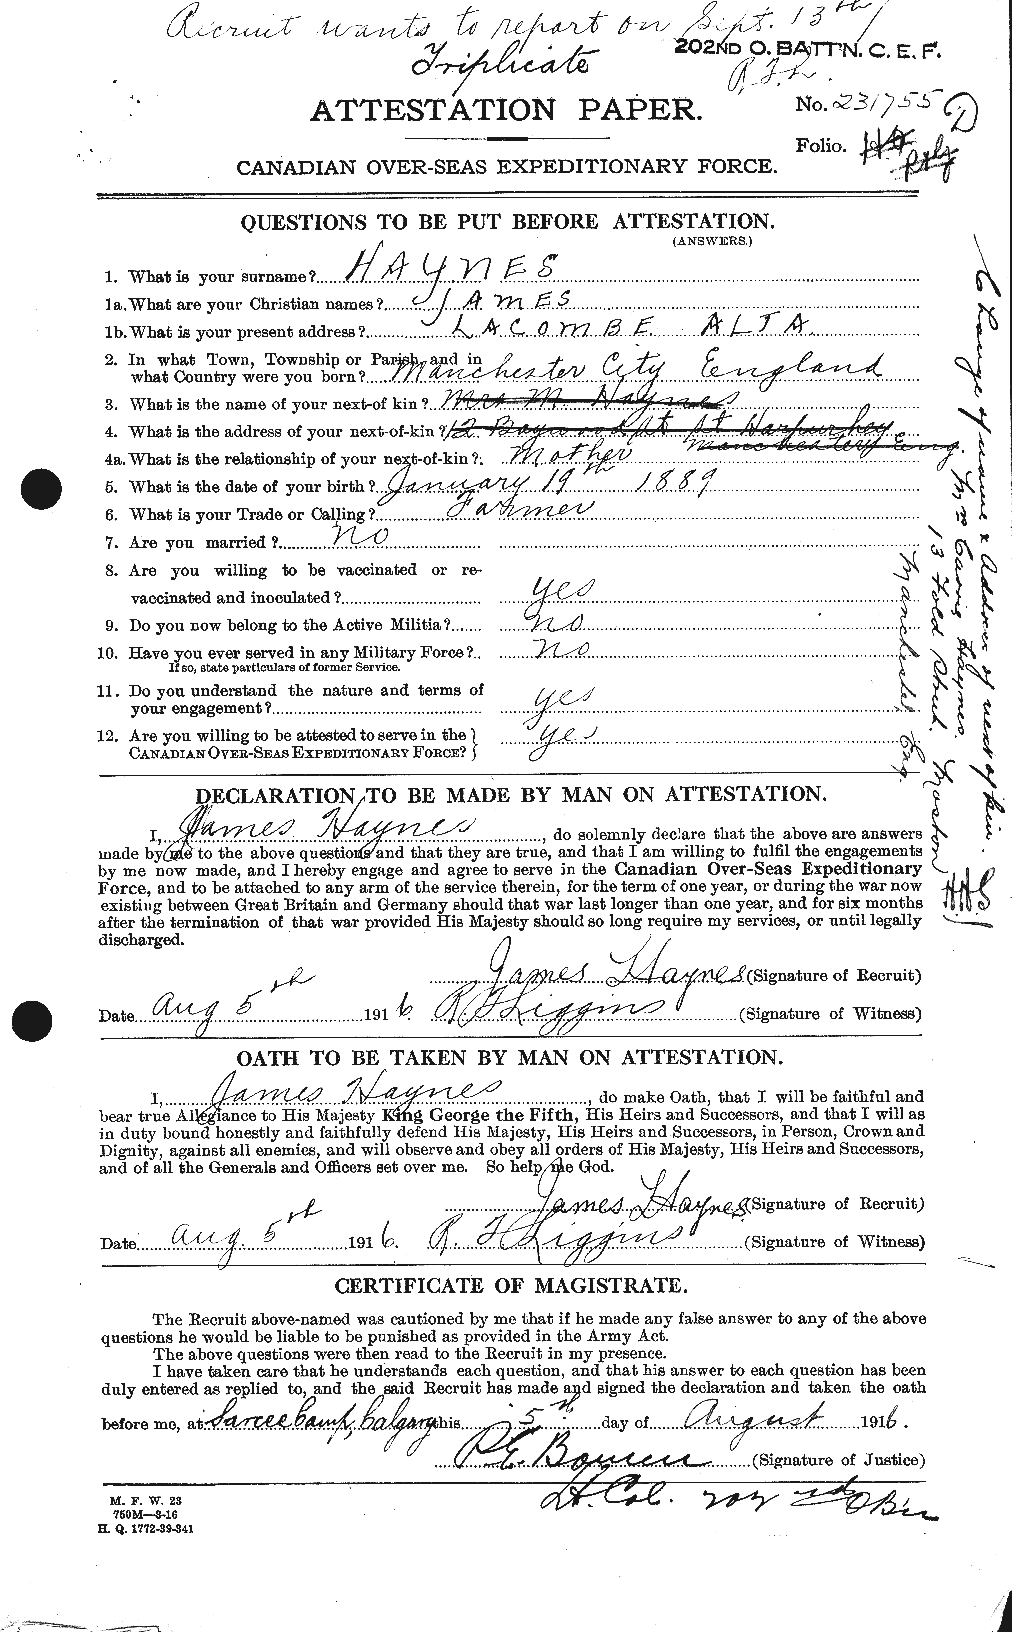 Personnel Records of the First World War - CEF 384379a